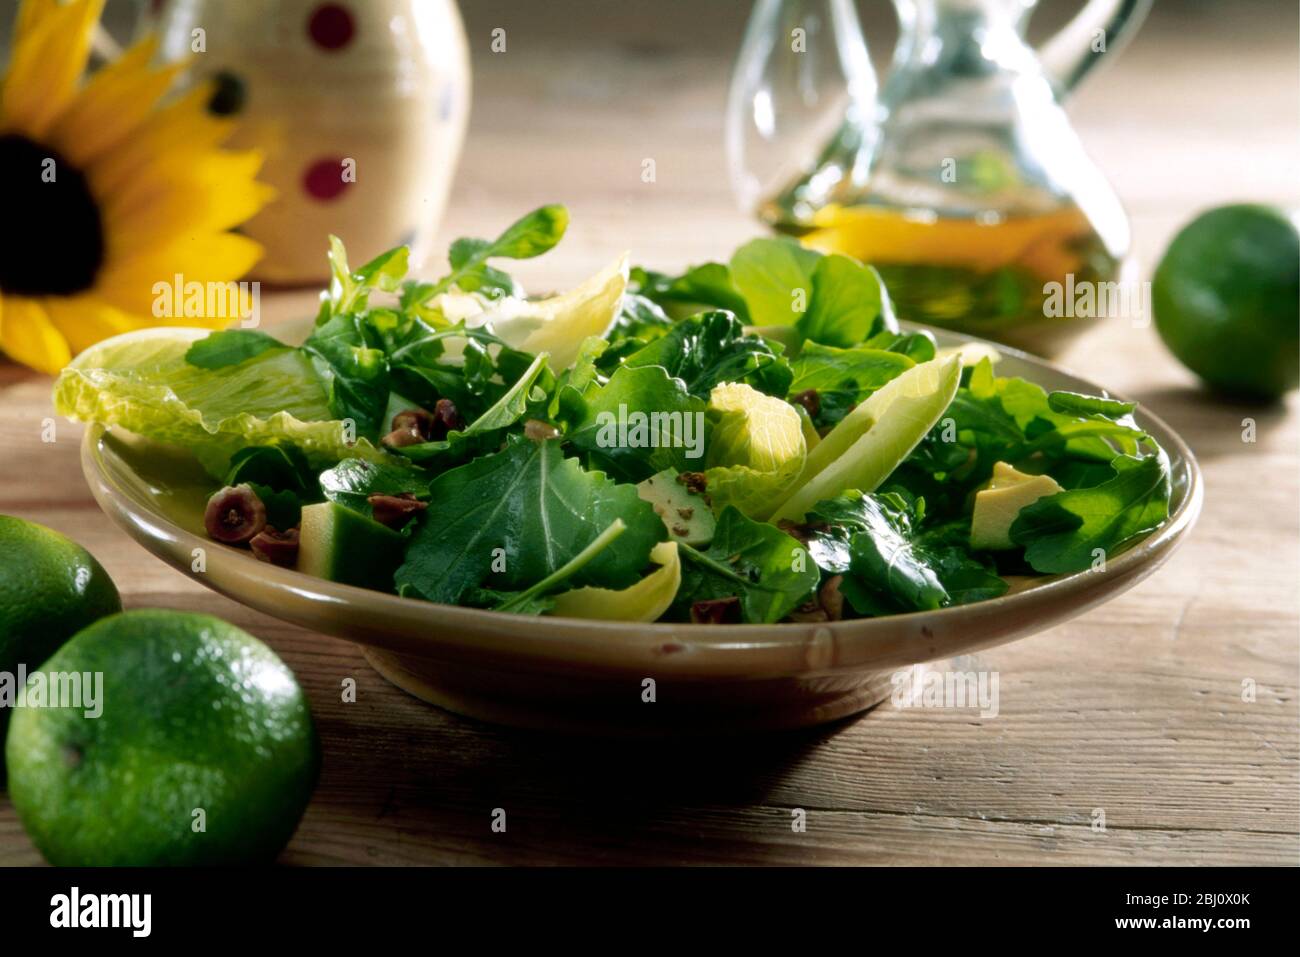 MIxed salad of various leaves including watercress, lambs lettuce, romaine, with avocado and chopped walnuts and hazelnuts with dressing in bottle of Stock Photo